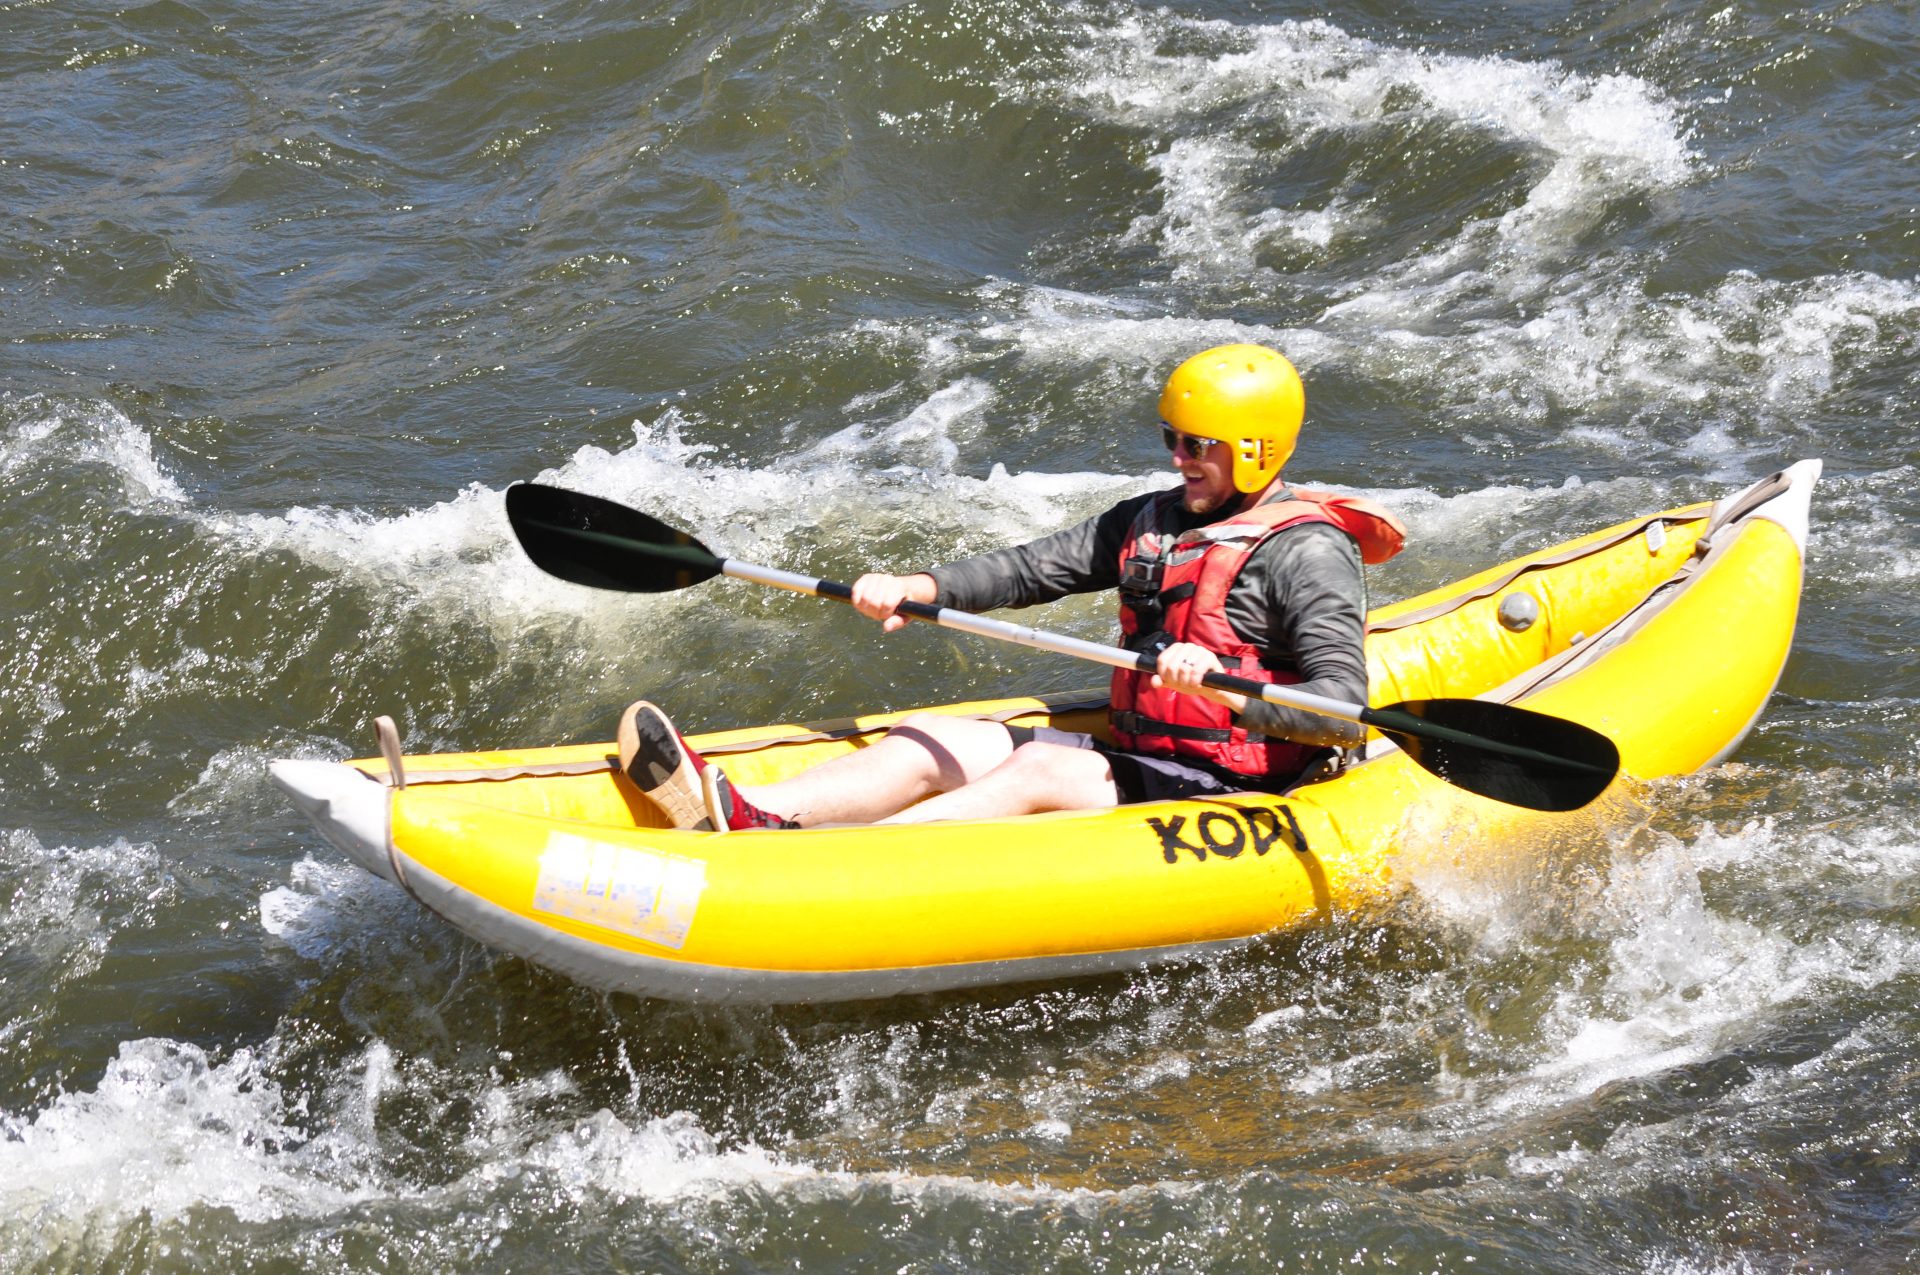 There are many things you can do in Colorado, so you must try ducky whitewater rafting while here